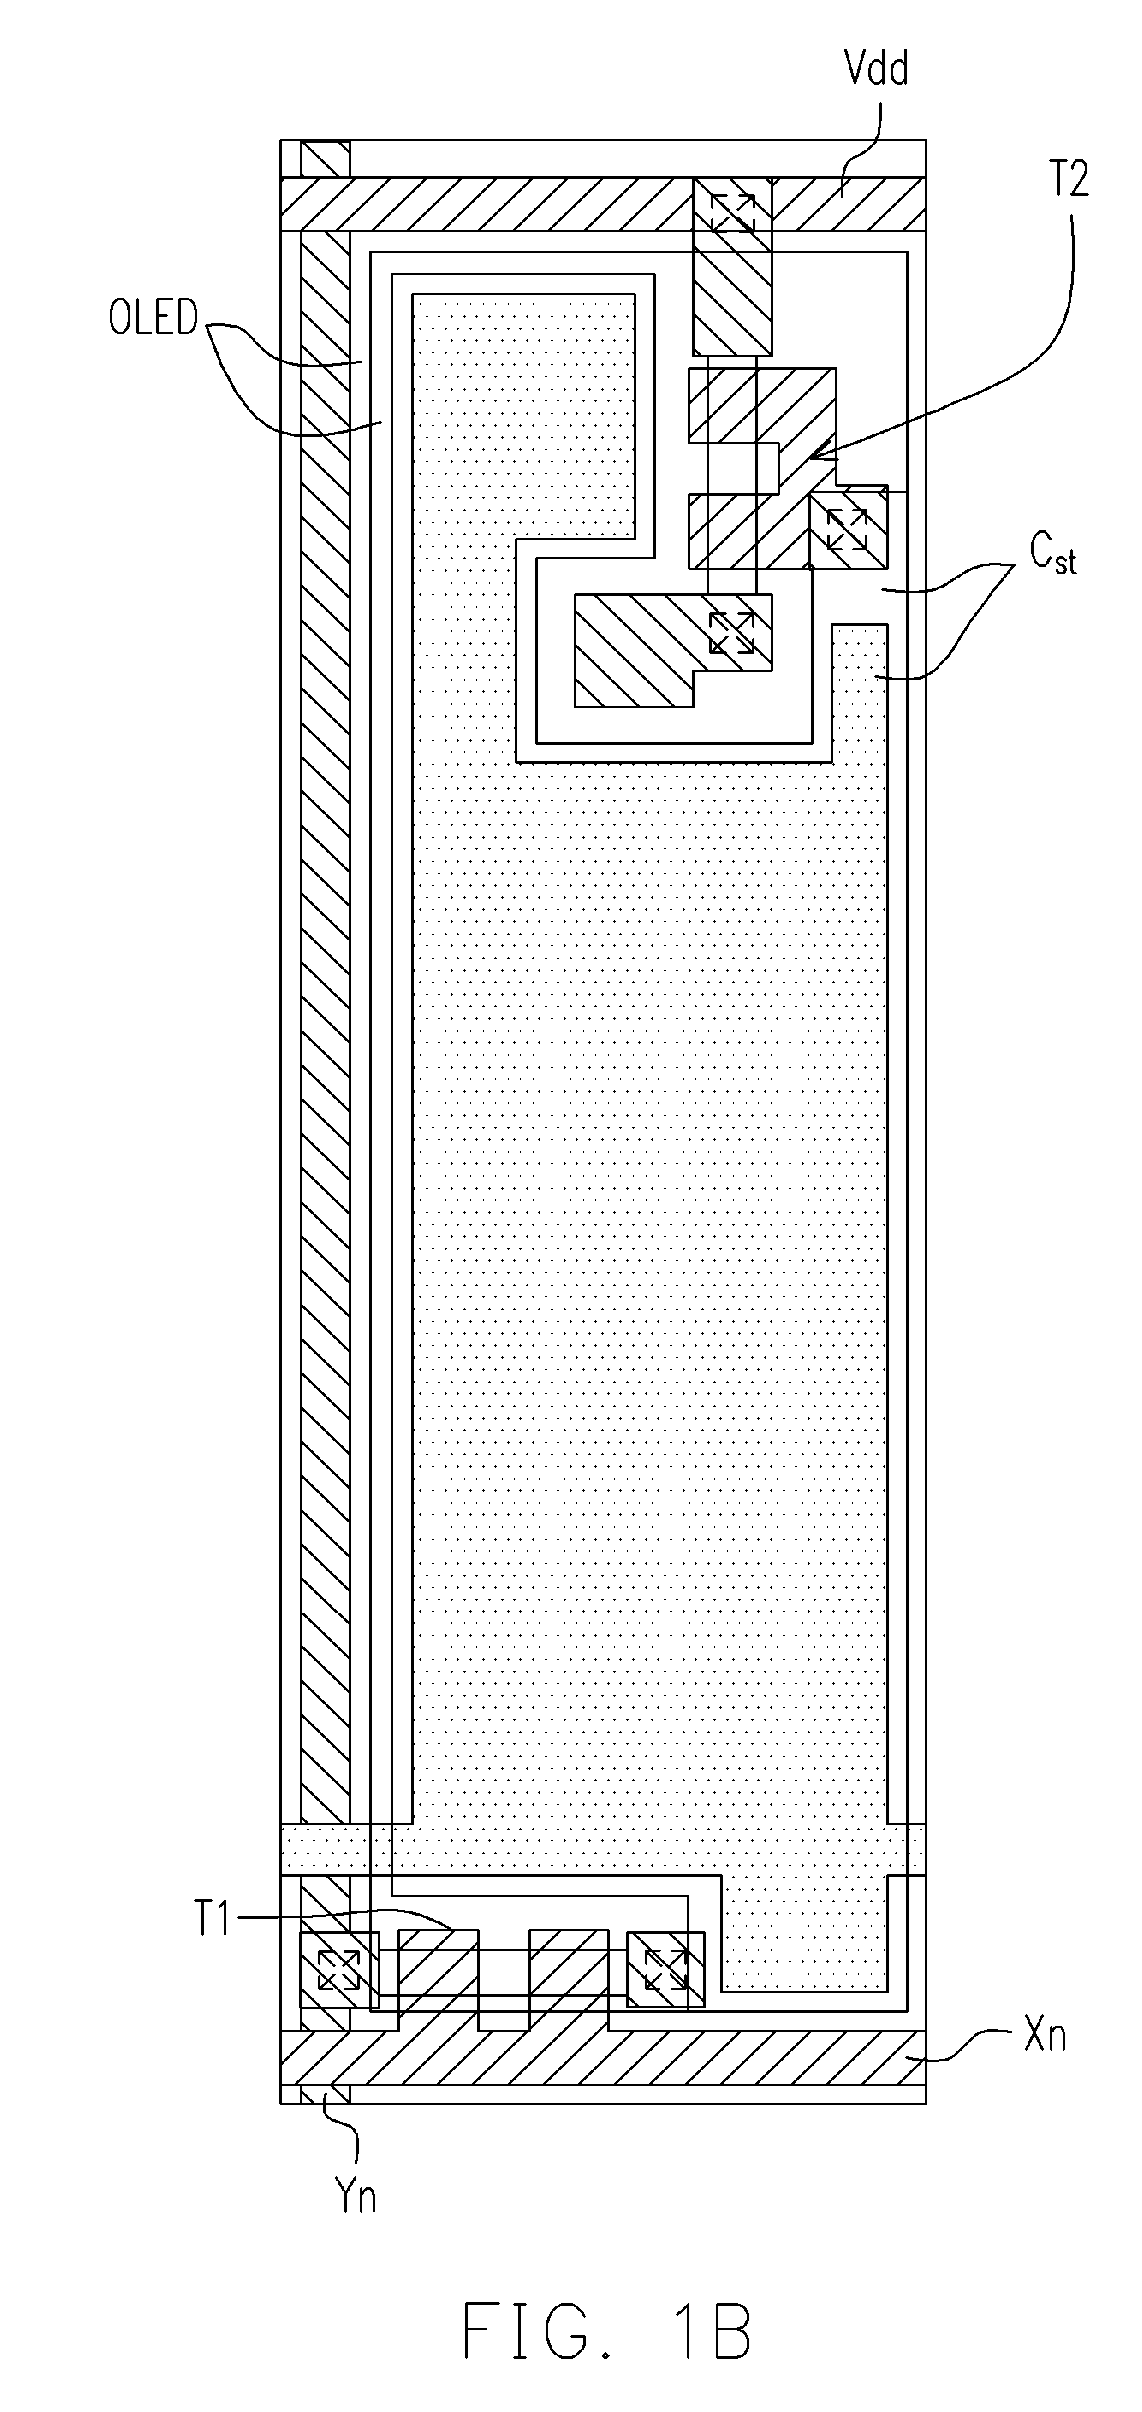 Pixel structure of active matrix organic light-emitting diode and method for fabricating the same